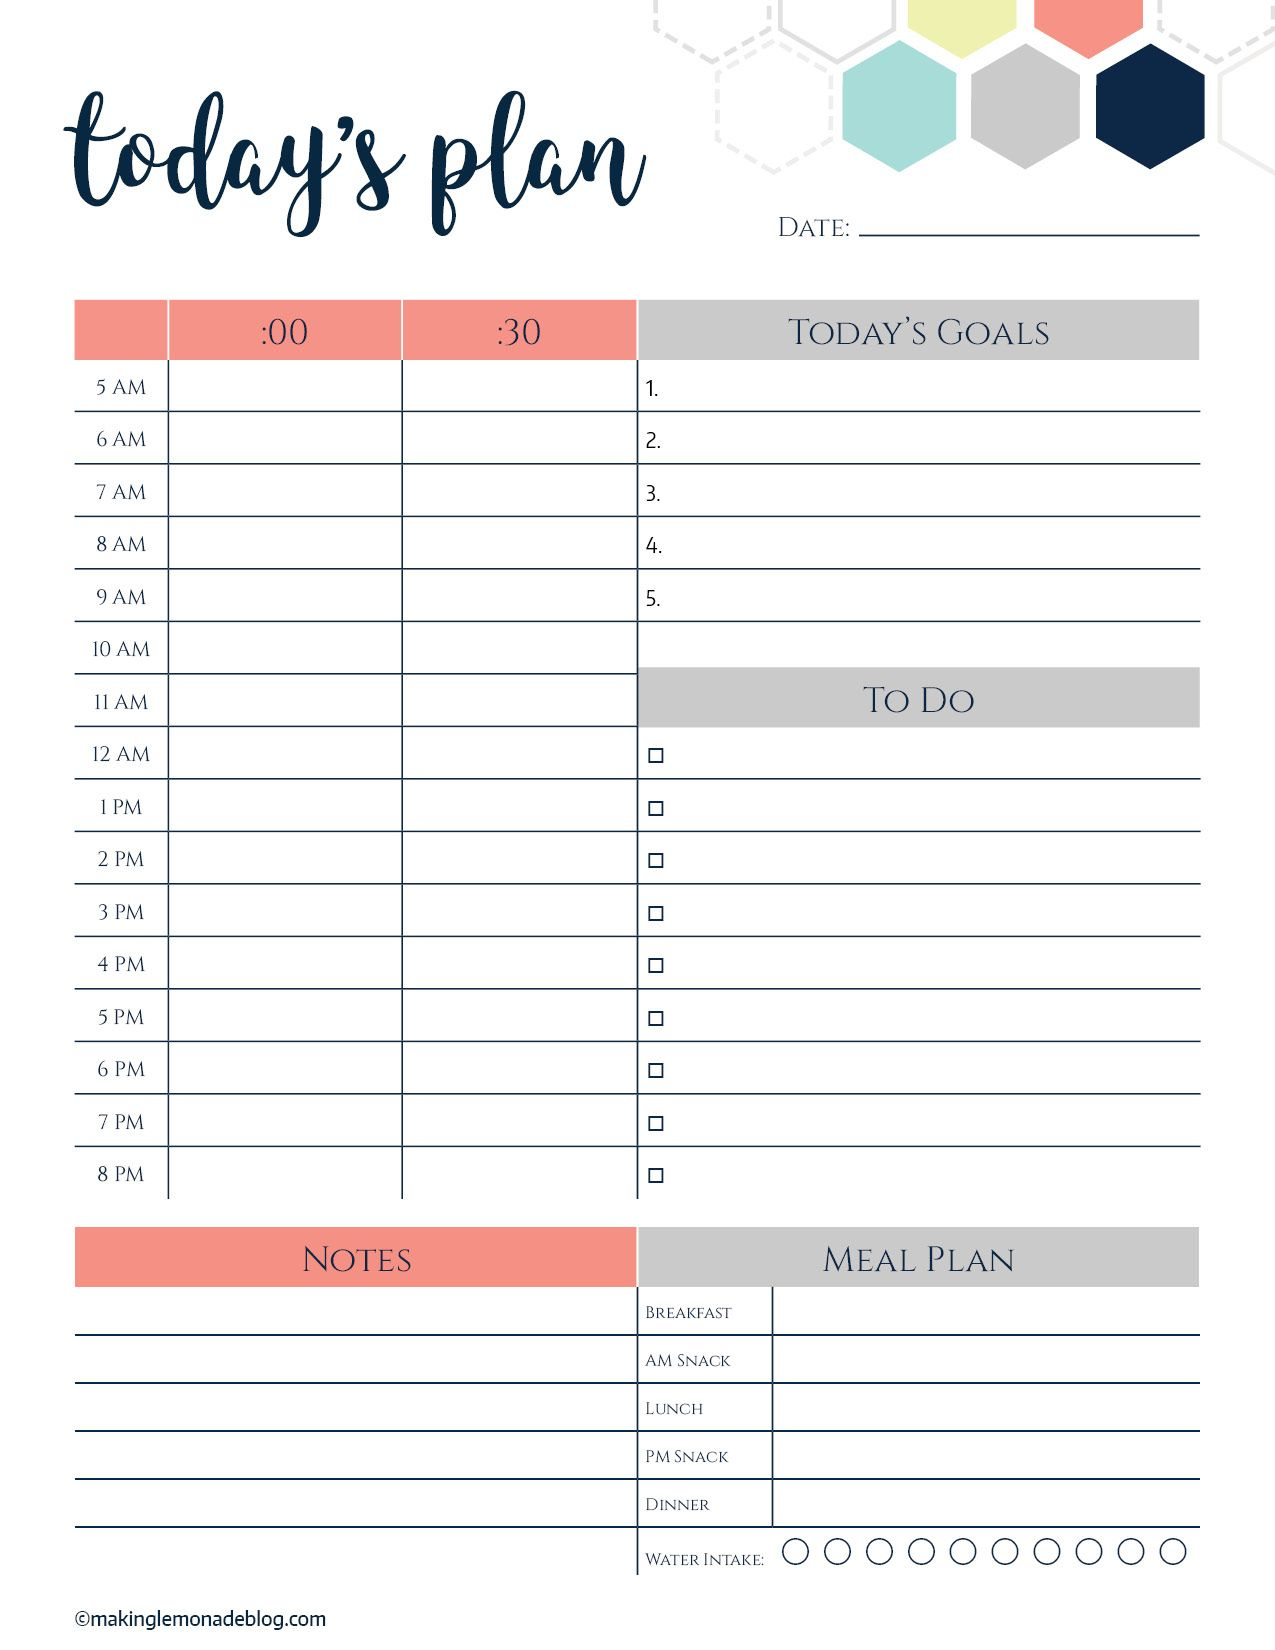 This Free Printable Daily Planner Changes Everything. Finally A Way - Free Printable Planner 2017 2018